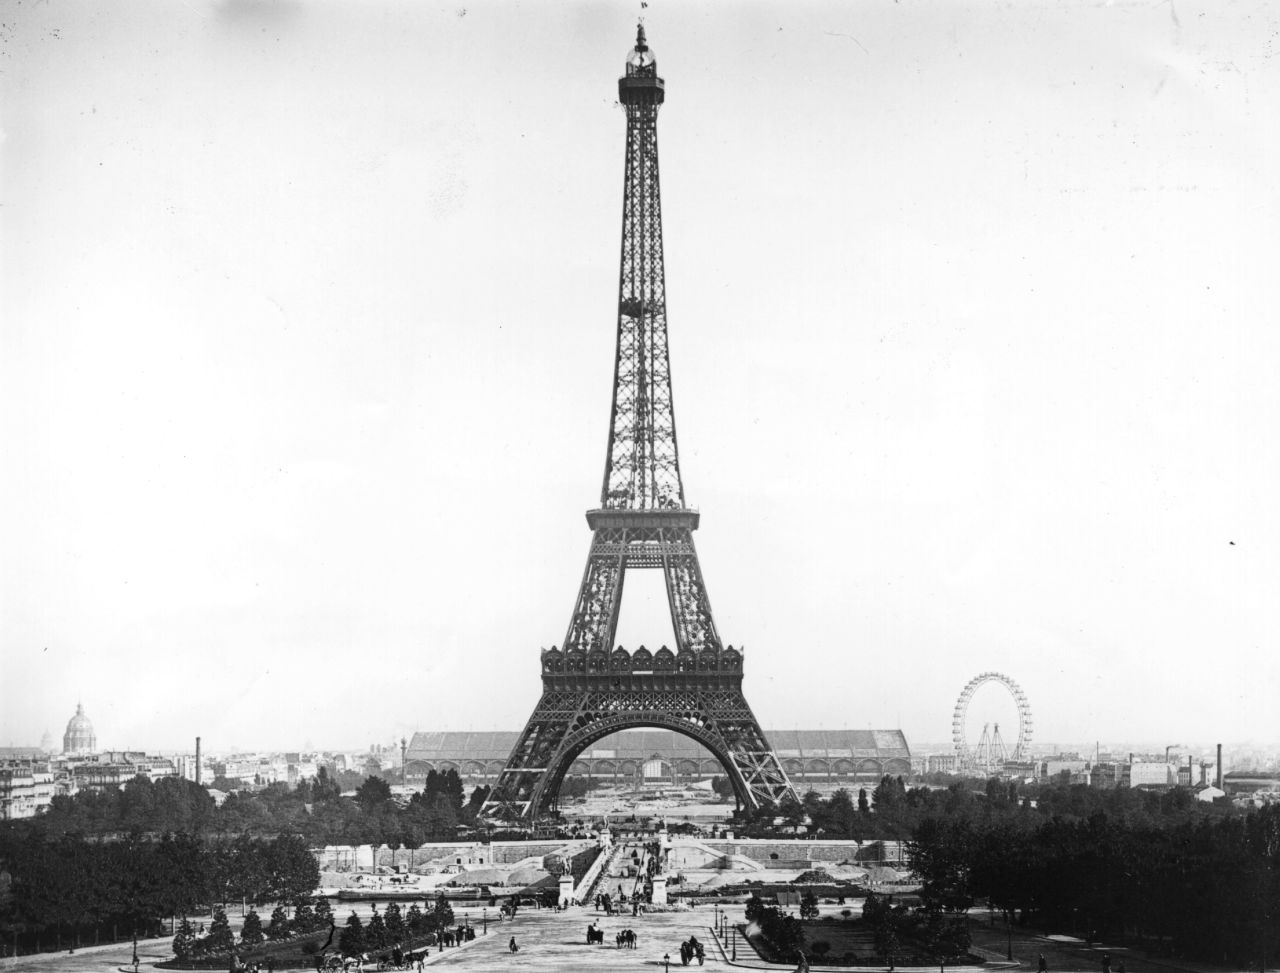 The Eiffel Tower at the time of Paris Exhibition of 1900.